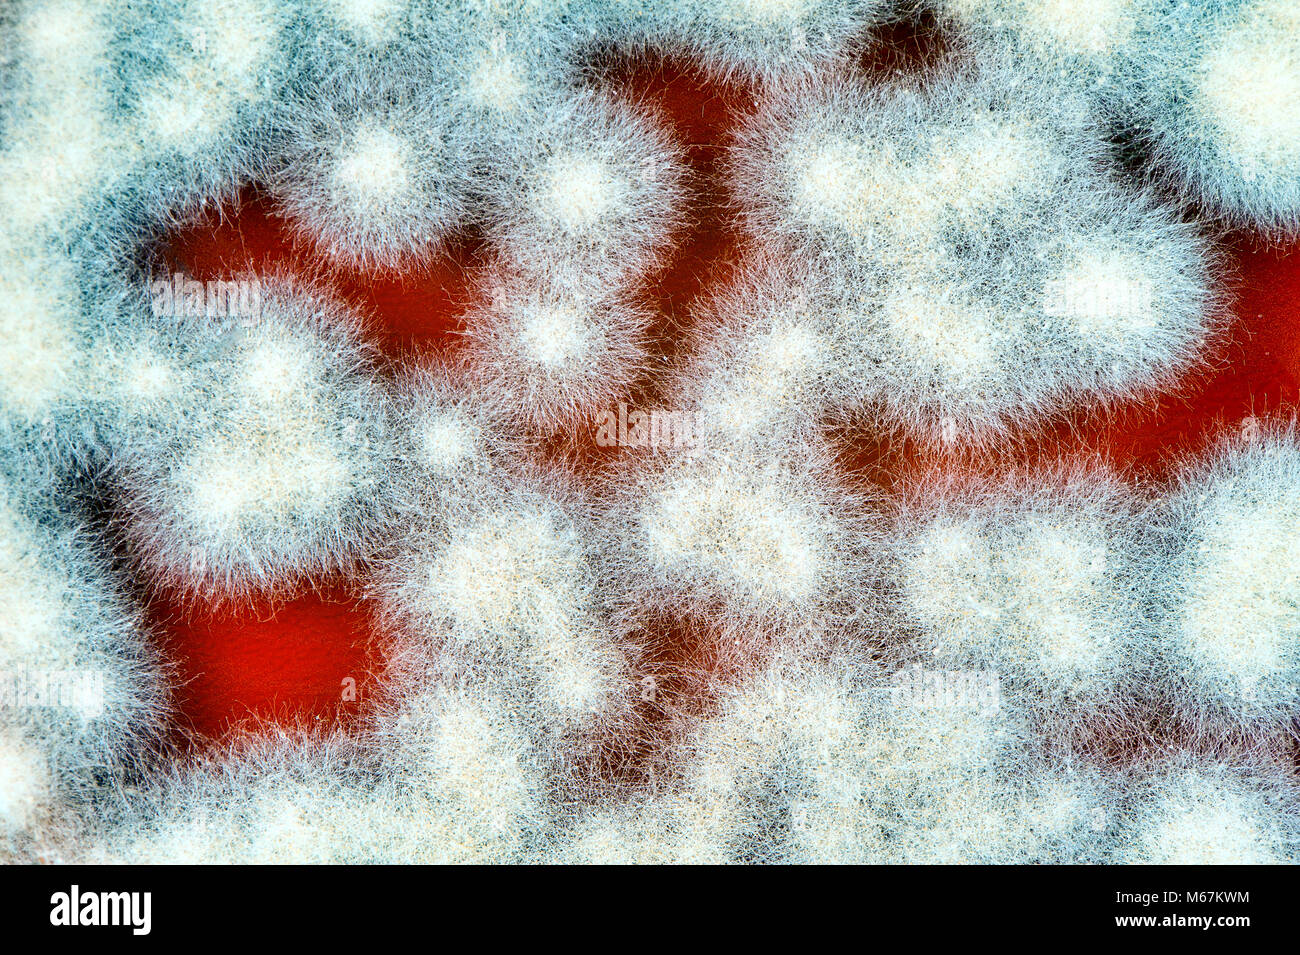 microbiology background made of fungi colonies. Surface of agar petri dish. Stock Photo